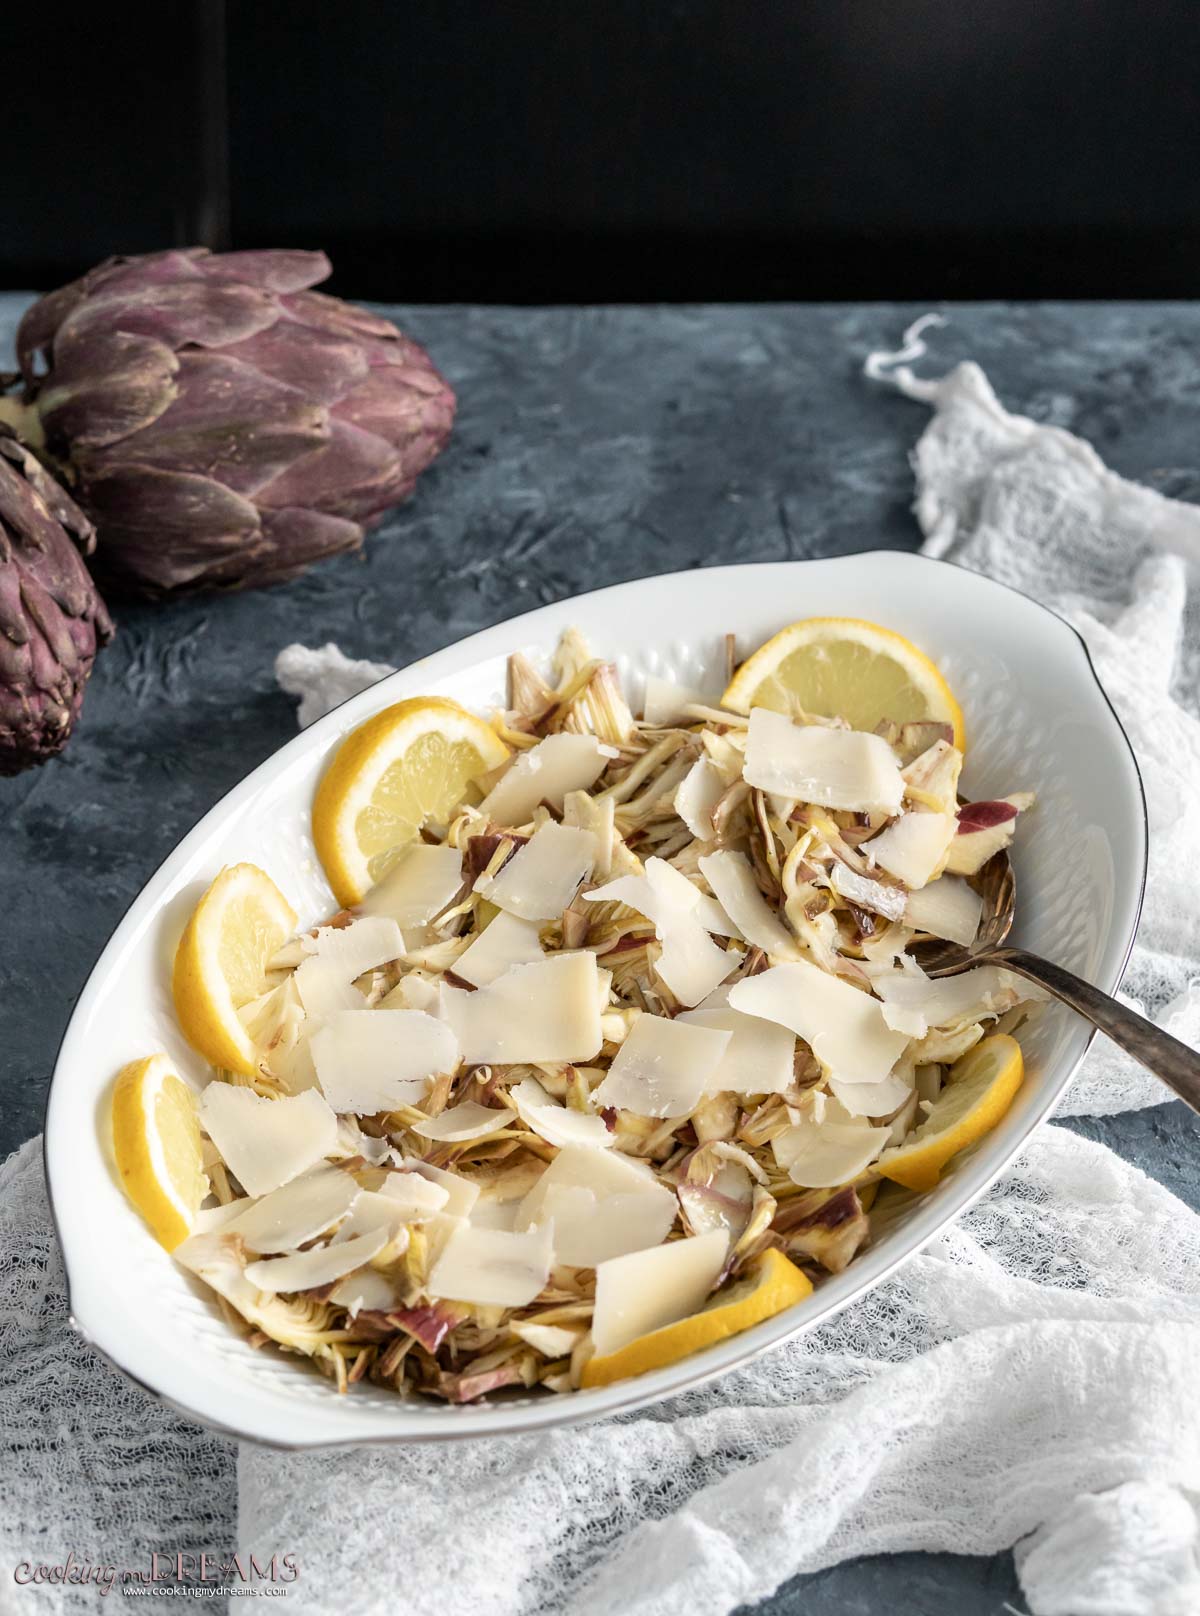 shaved artichoke salad with parmigiano cheese and lemon slices on an oval platter with a serving spoon